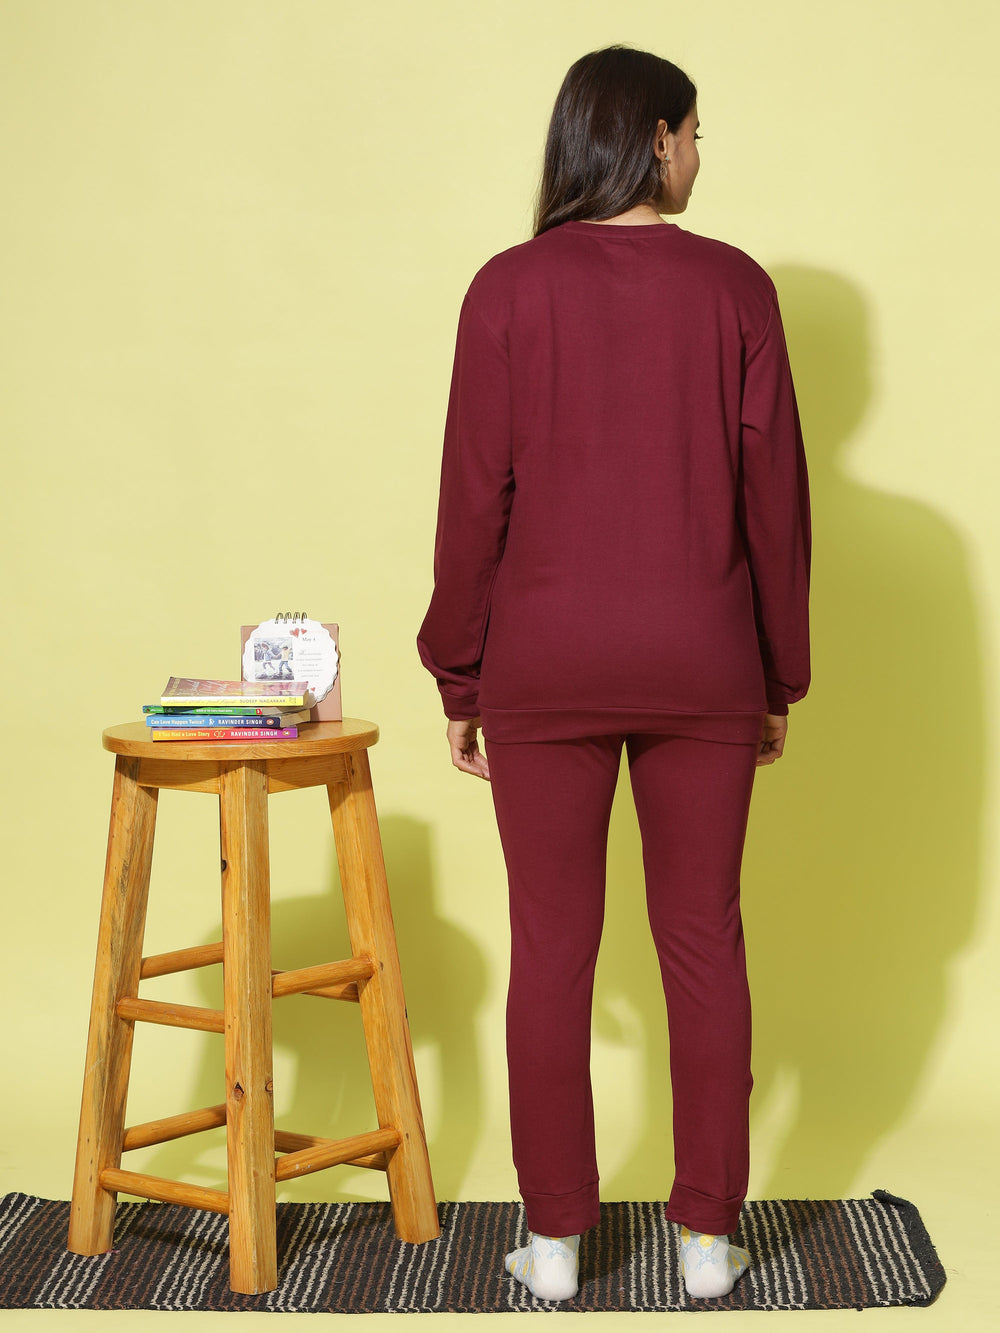  Jogger set  Best Price in Online Maroon Hosiery Cotton Track Suit- 9shines label 